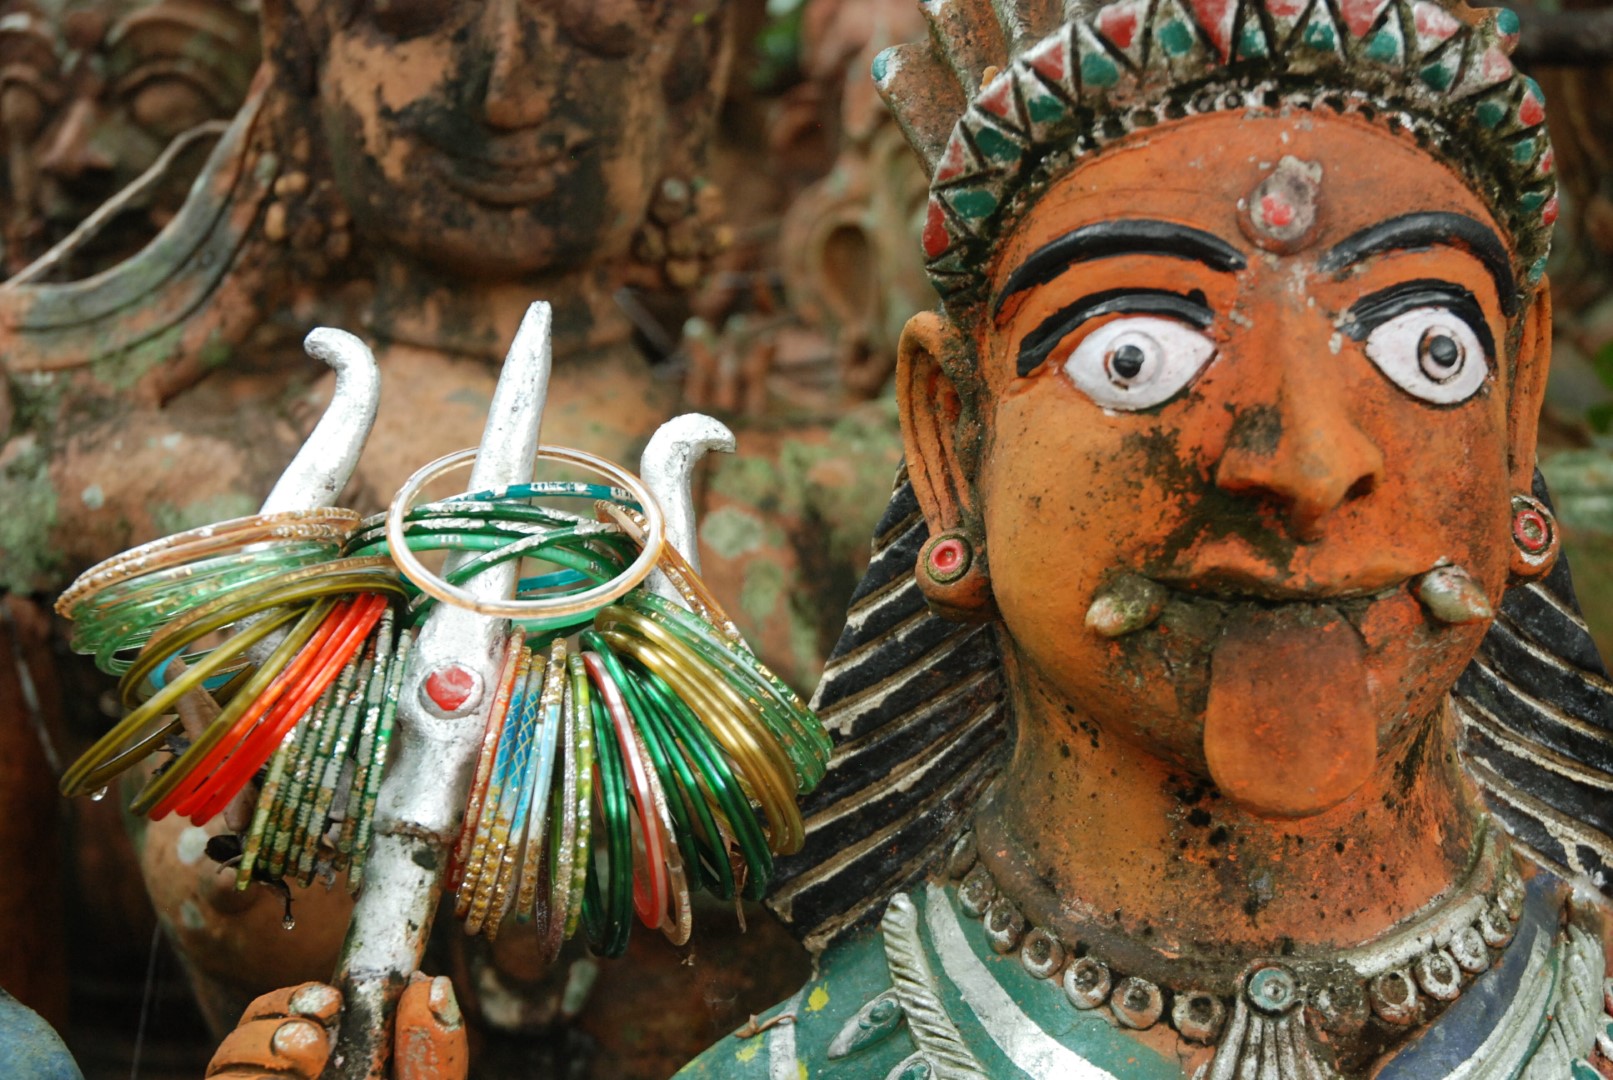 <span style="font-weight:normal;">A "portrait" of Kaliyamman, with a Mona Lisa smile, fangs and her red tongue sticking out - telling attributes of her ambivalent nature. On her trident are glass bangles given as offerings by devotees - gifts to please her, appease her wrath and plead for fertility for women, and health, healing and protection of children.</span>